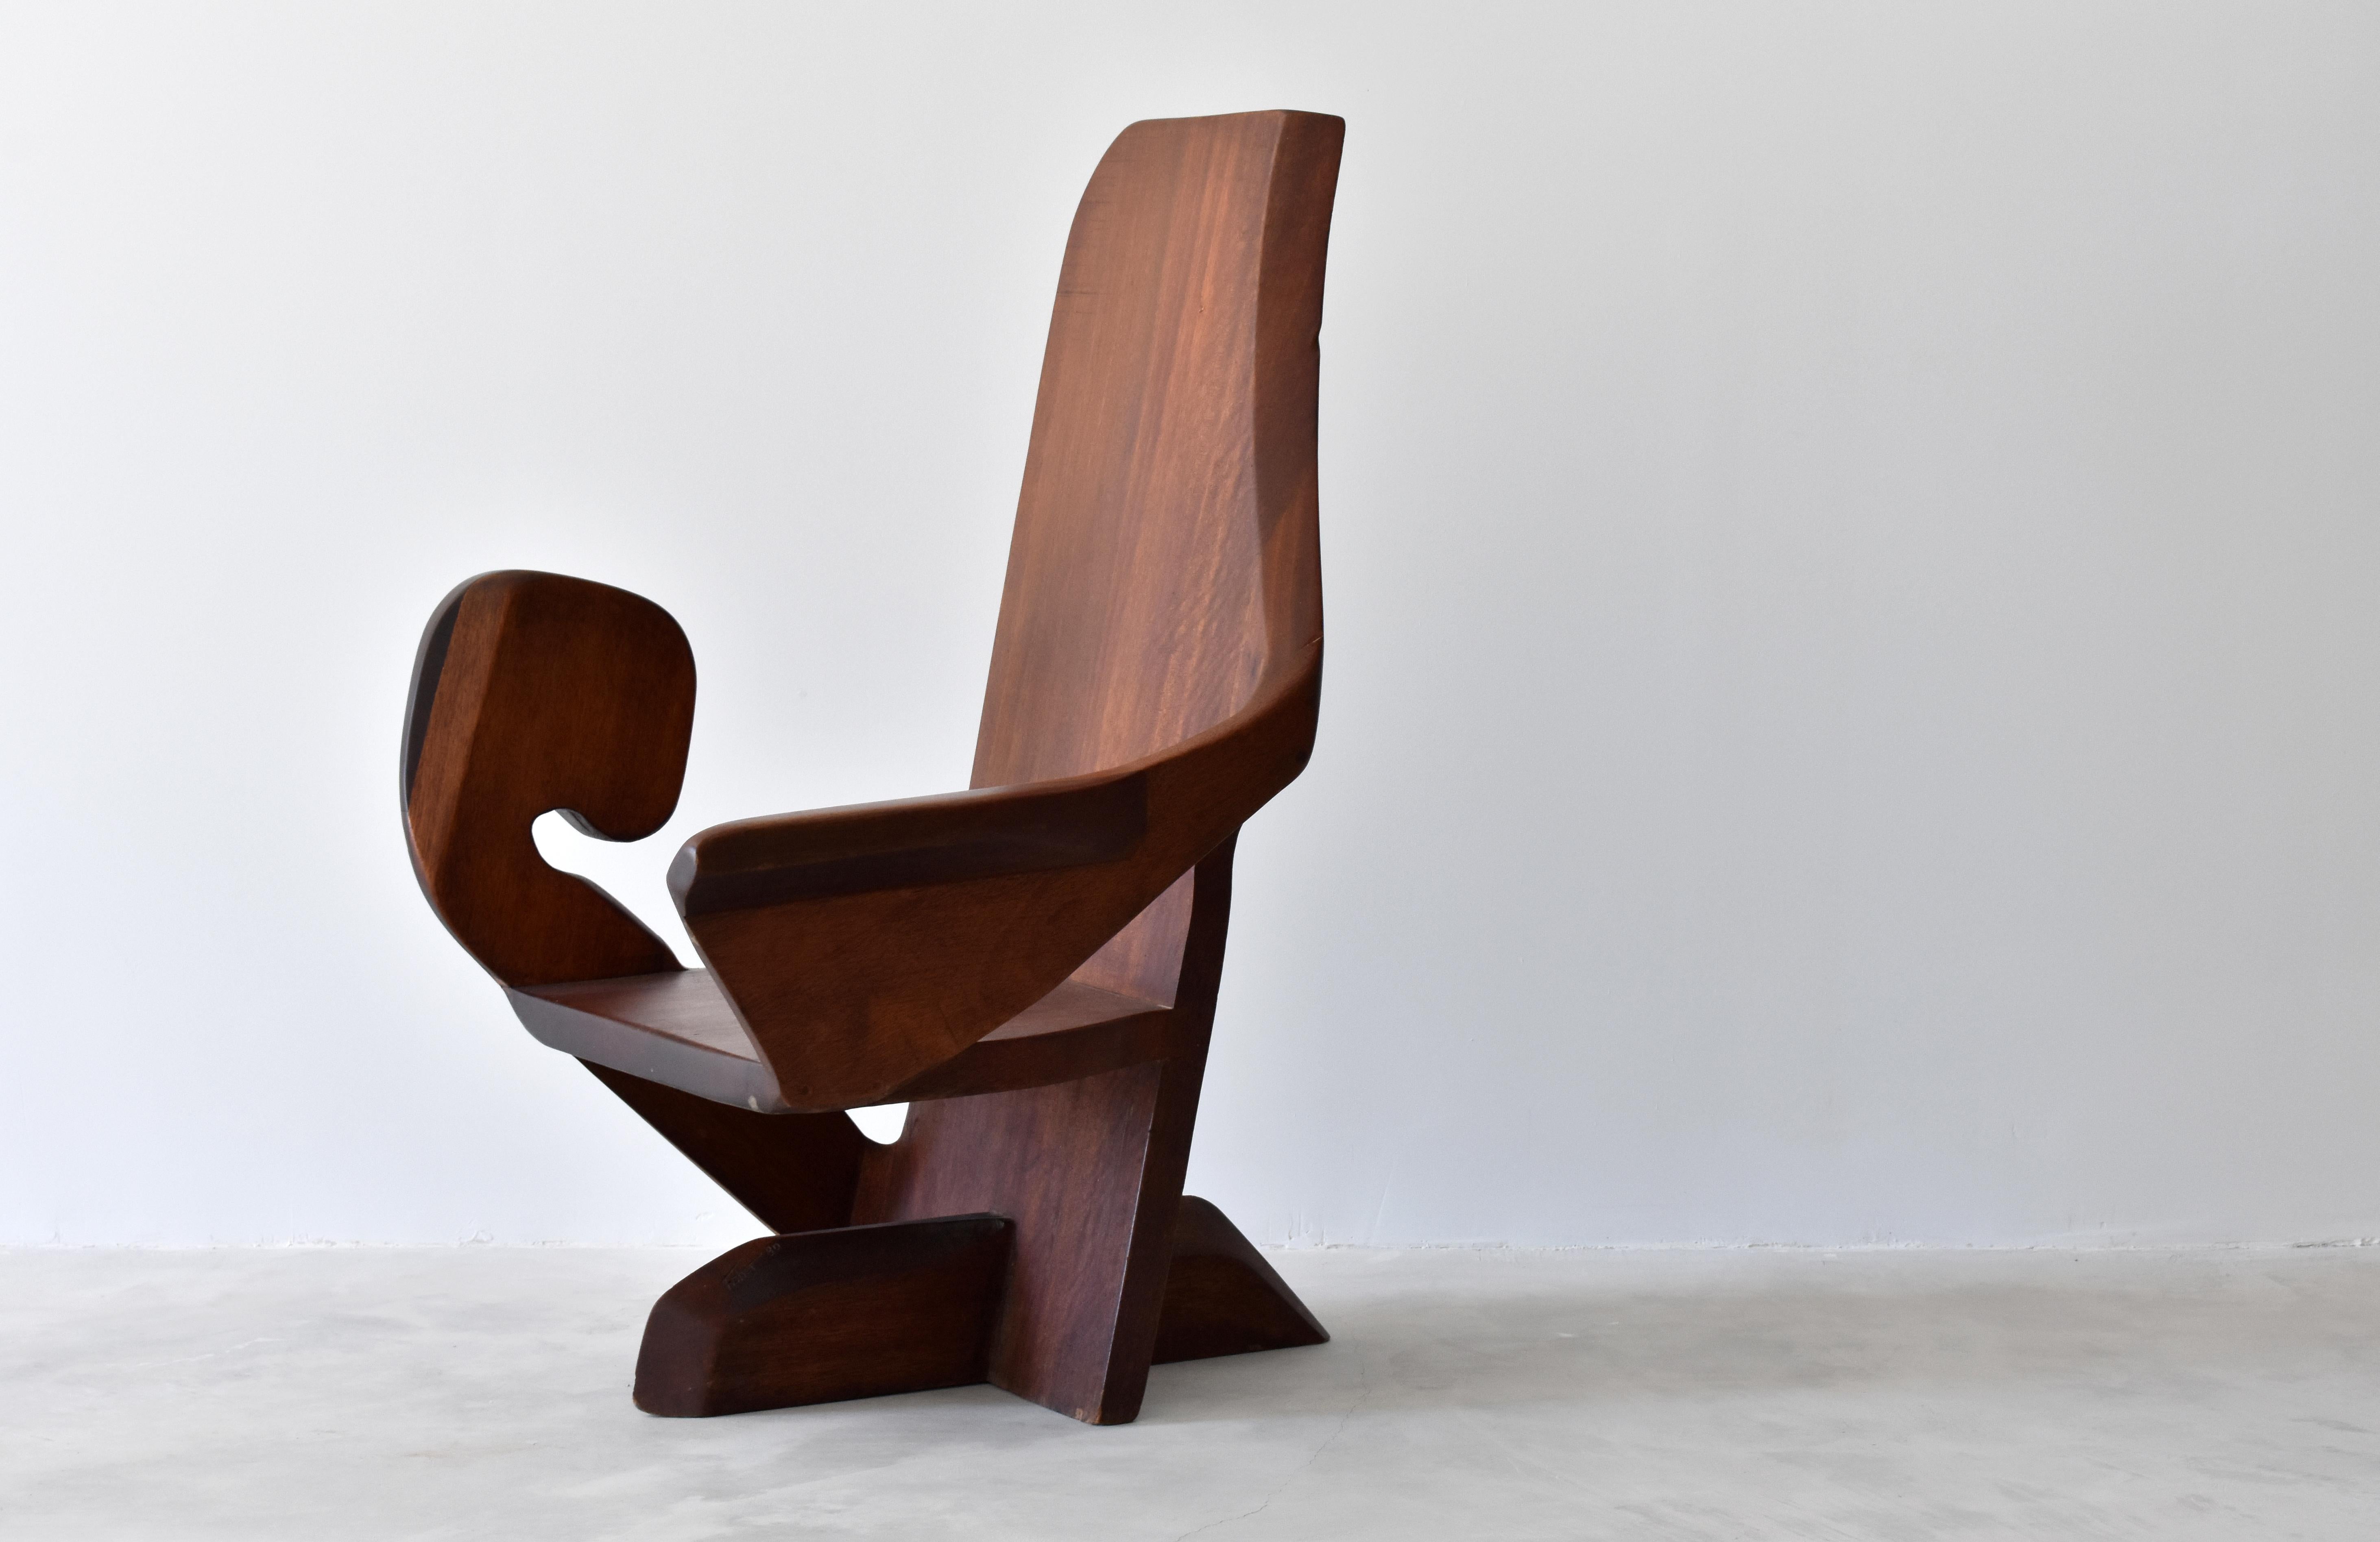 An American studio craft chair with stylized arms over T-shaped base. Hardwood slabs are meticulously sculpted into modernist form and joined together. 

